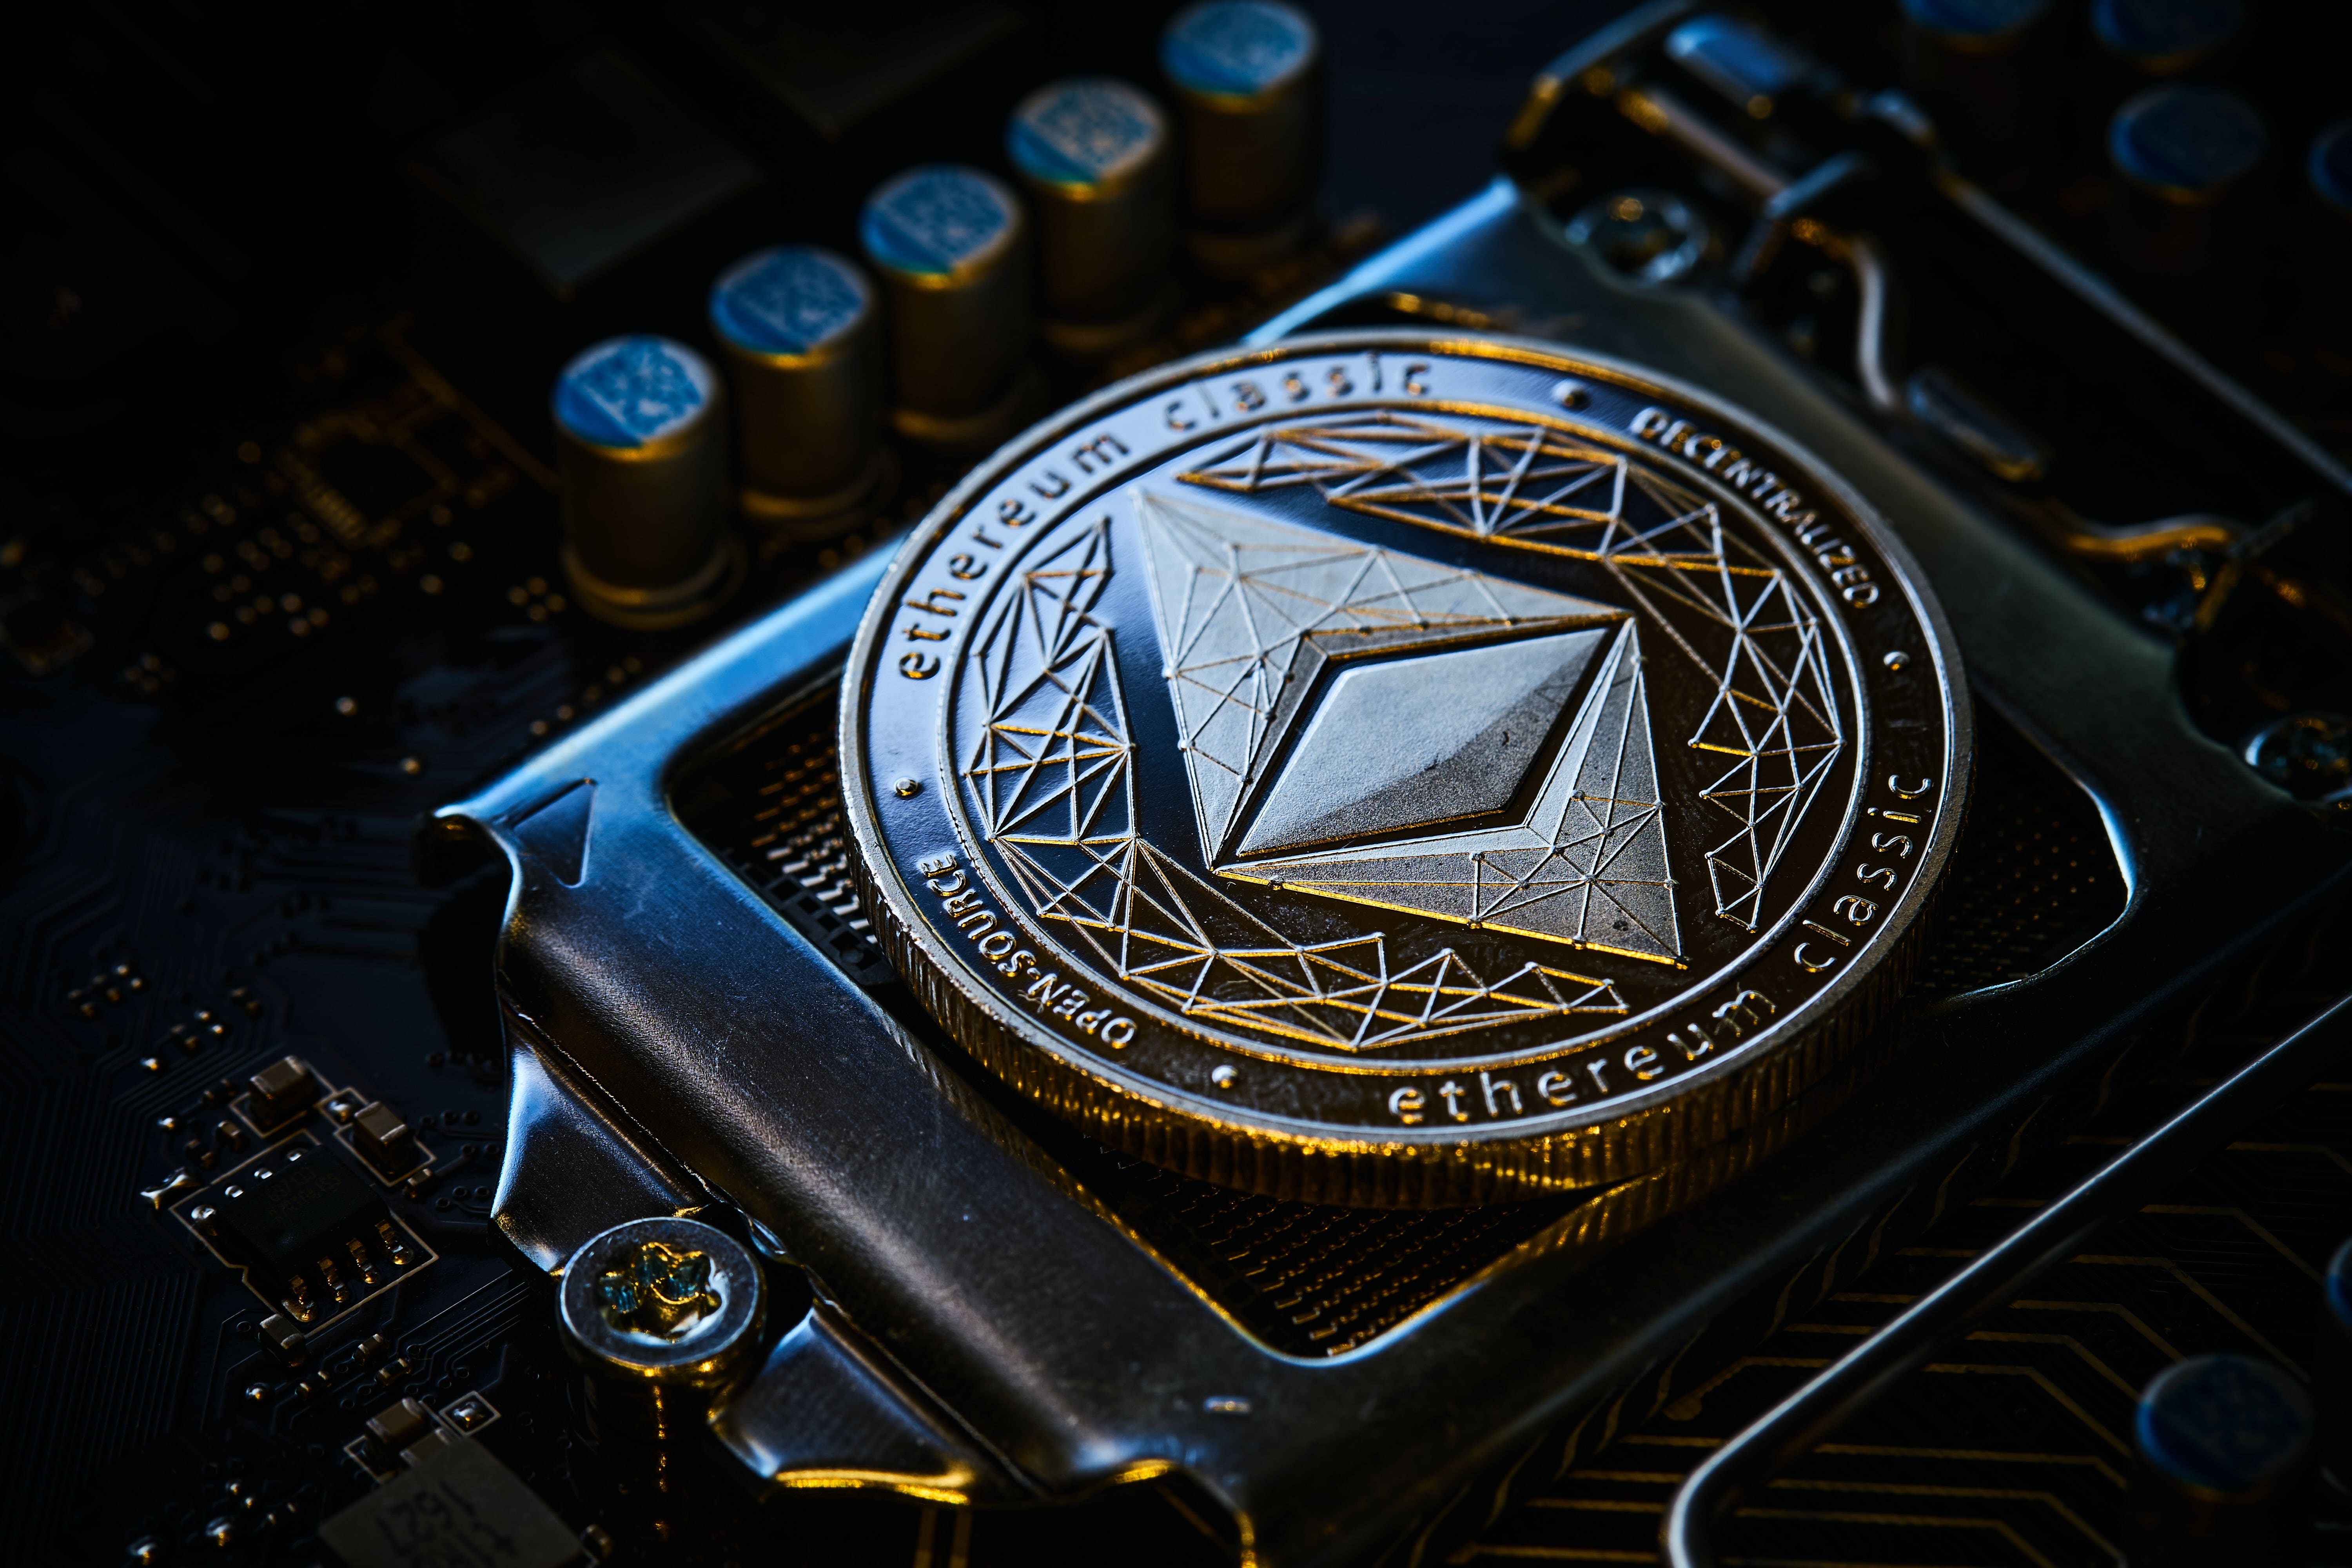 Ethereum Worth Over $25B Staked In Proof-Of-Stake Deposit Contract